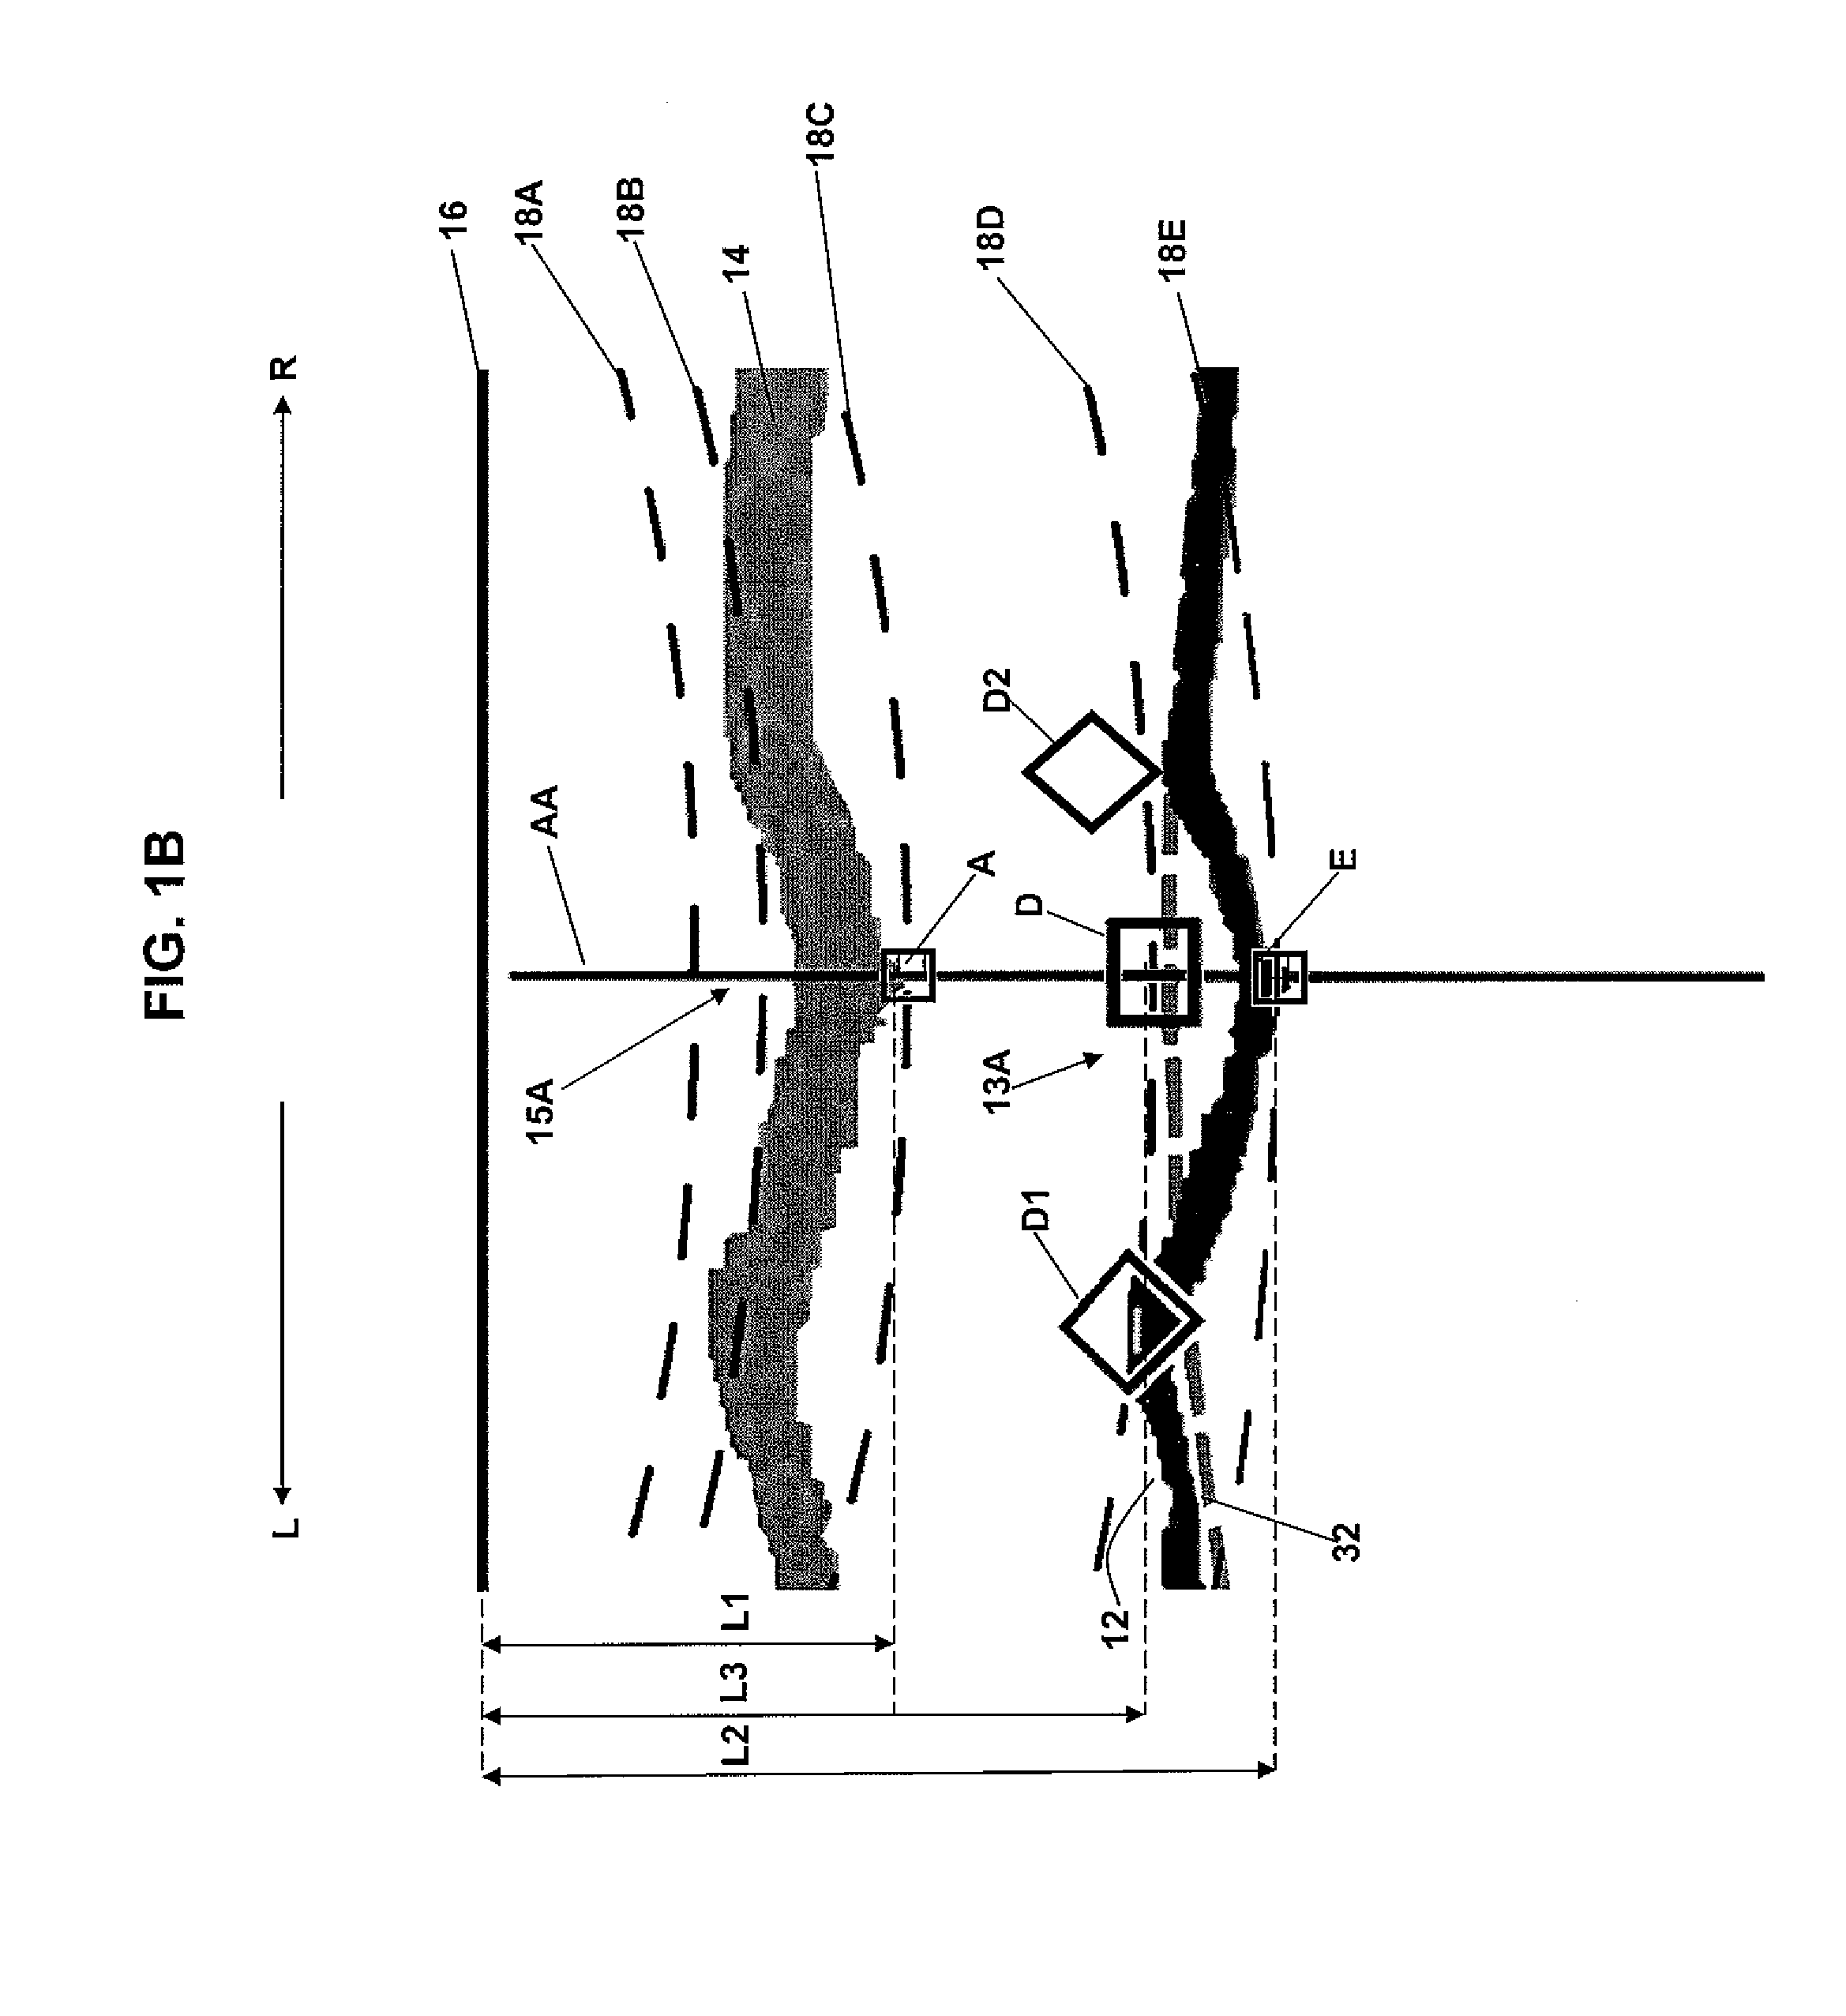 Method and System for Displaying the Electric Field Generated on the Brain by Transcranial Magnetic Stimulation